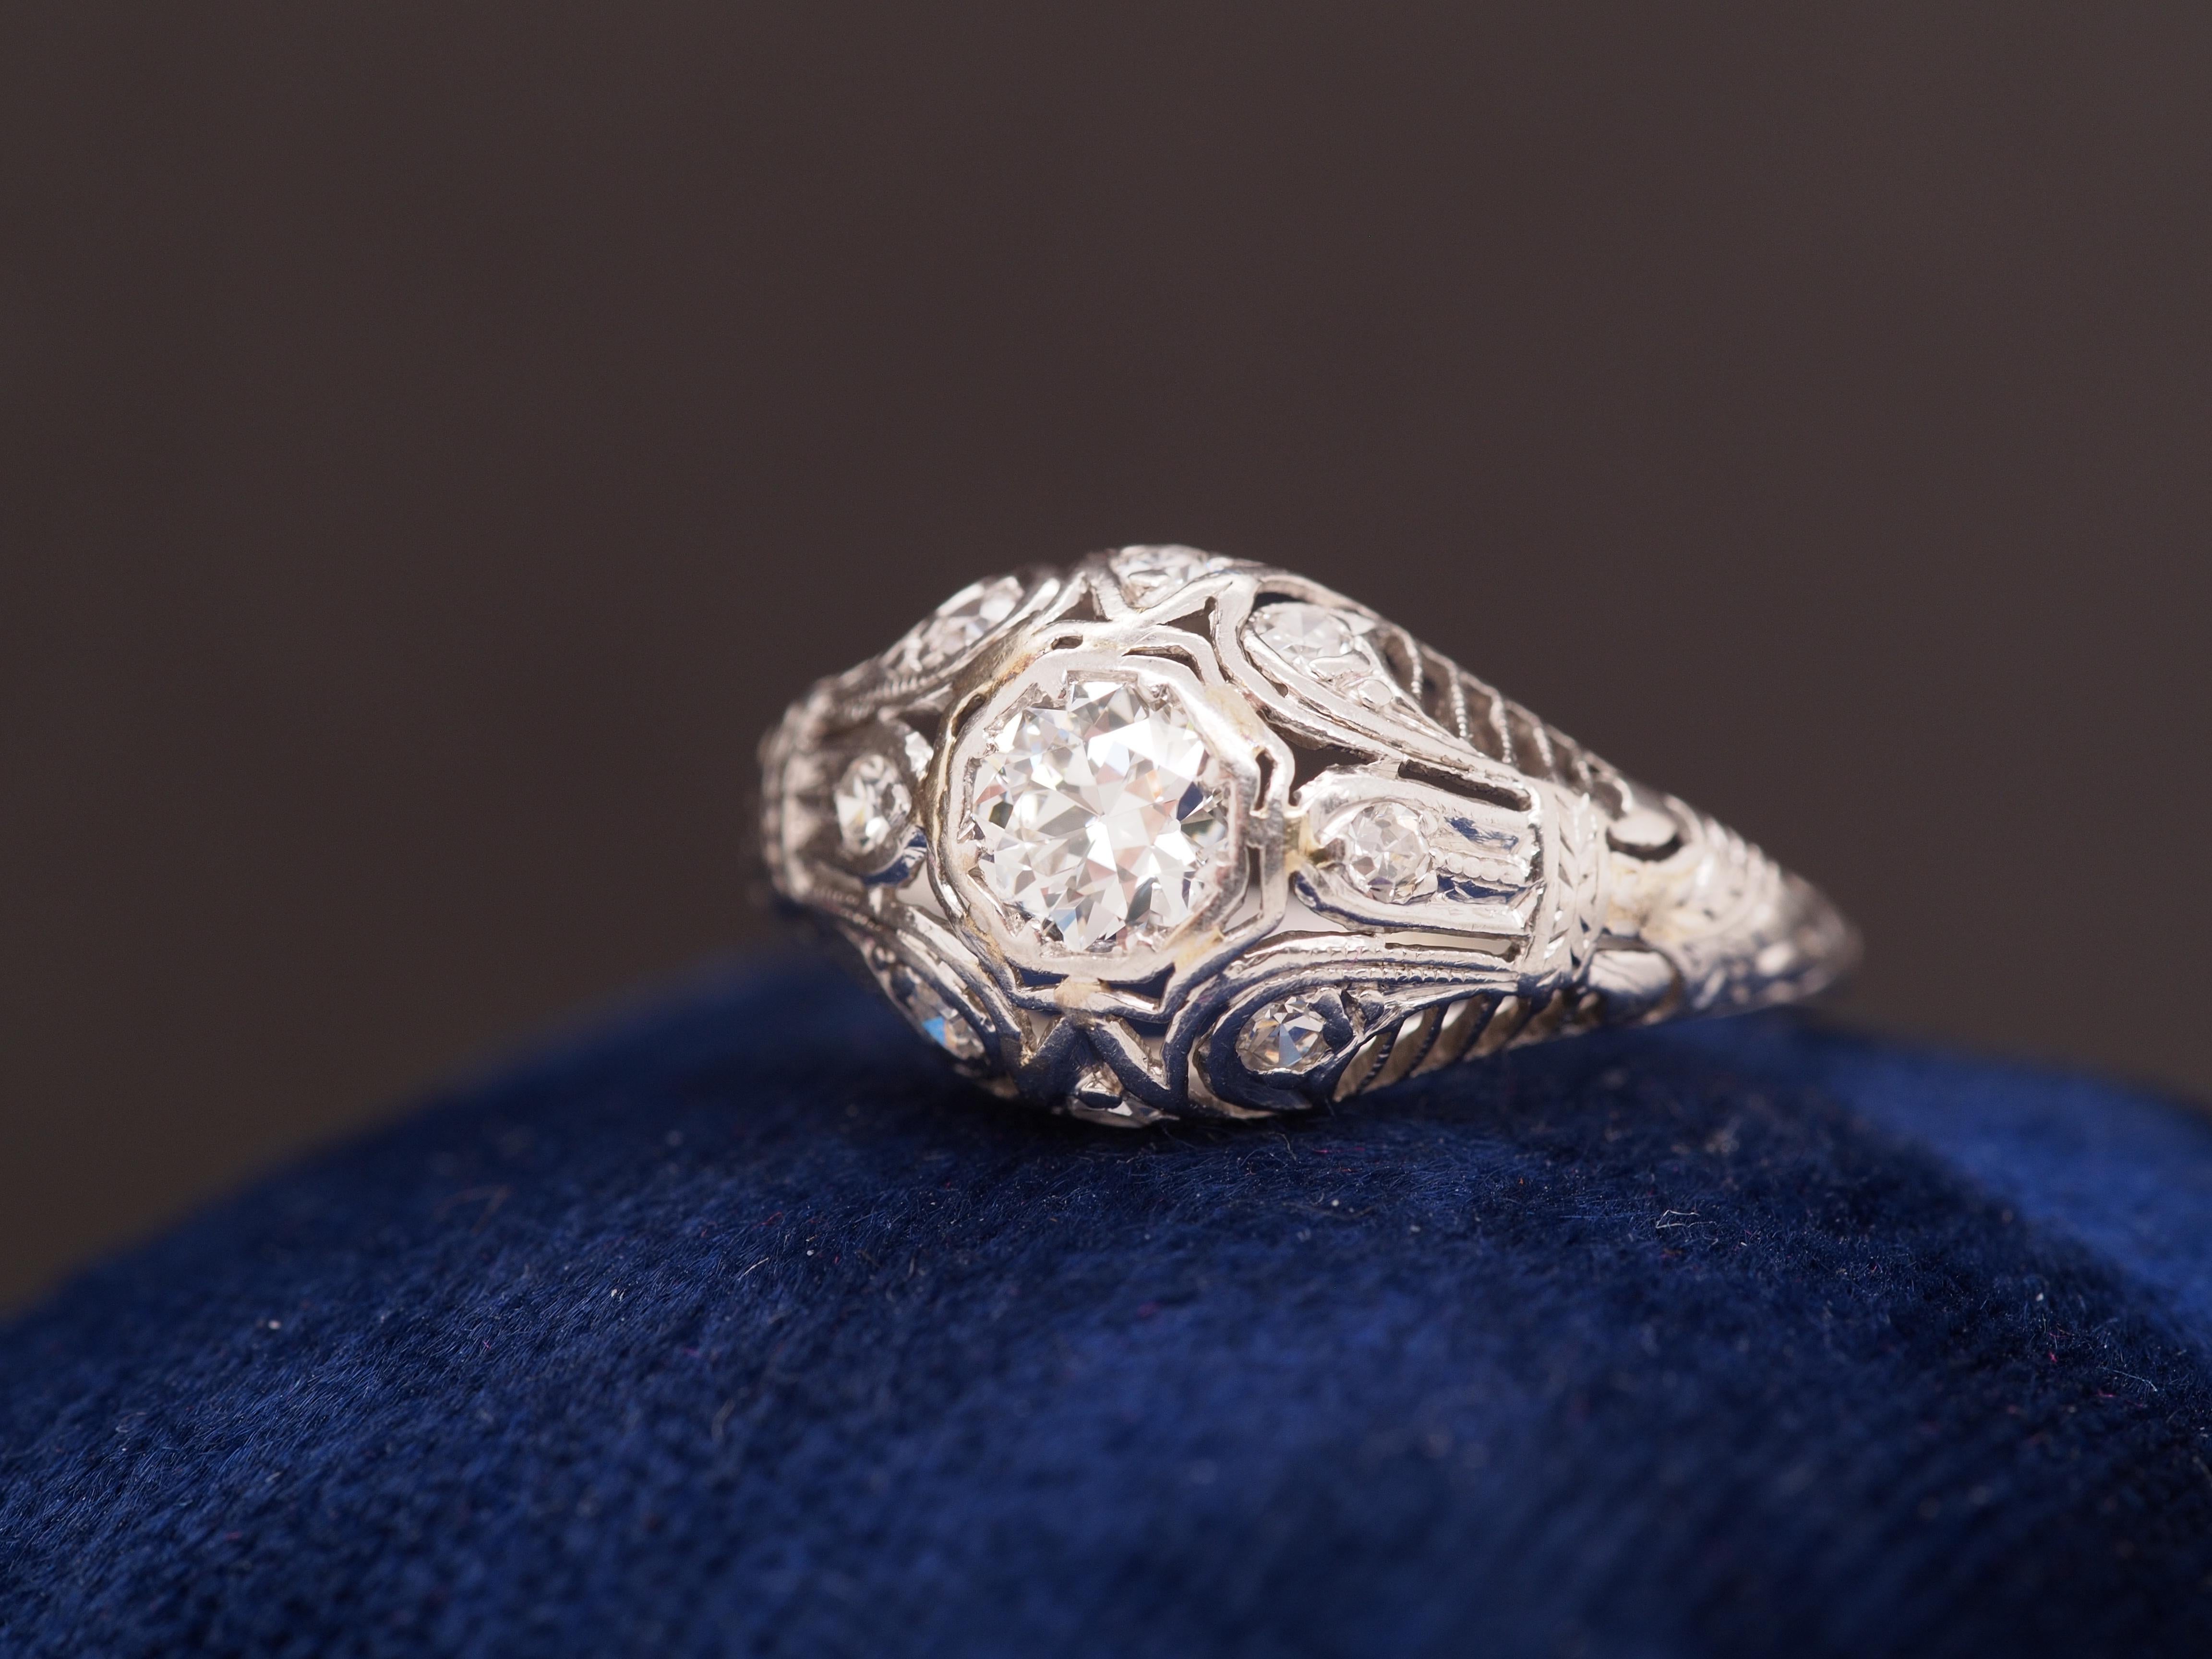 Year: 1920s
Item Details:
Ring Size: 6
Metal Type: Platinum [Hallmarked, and Tested]
Weight: 2.6 grams
Diamond Details:
Center Diamond: Natural Diamond, Old European cut, .35ct total weight, G Color, VS Clarity
Side Diamonds: .15ct total weight, Old